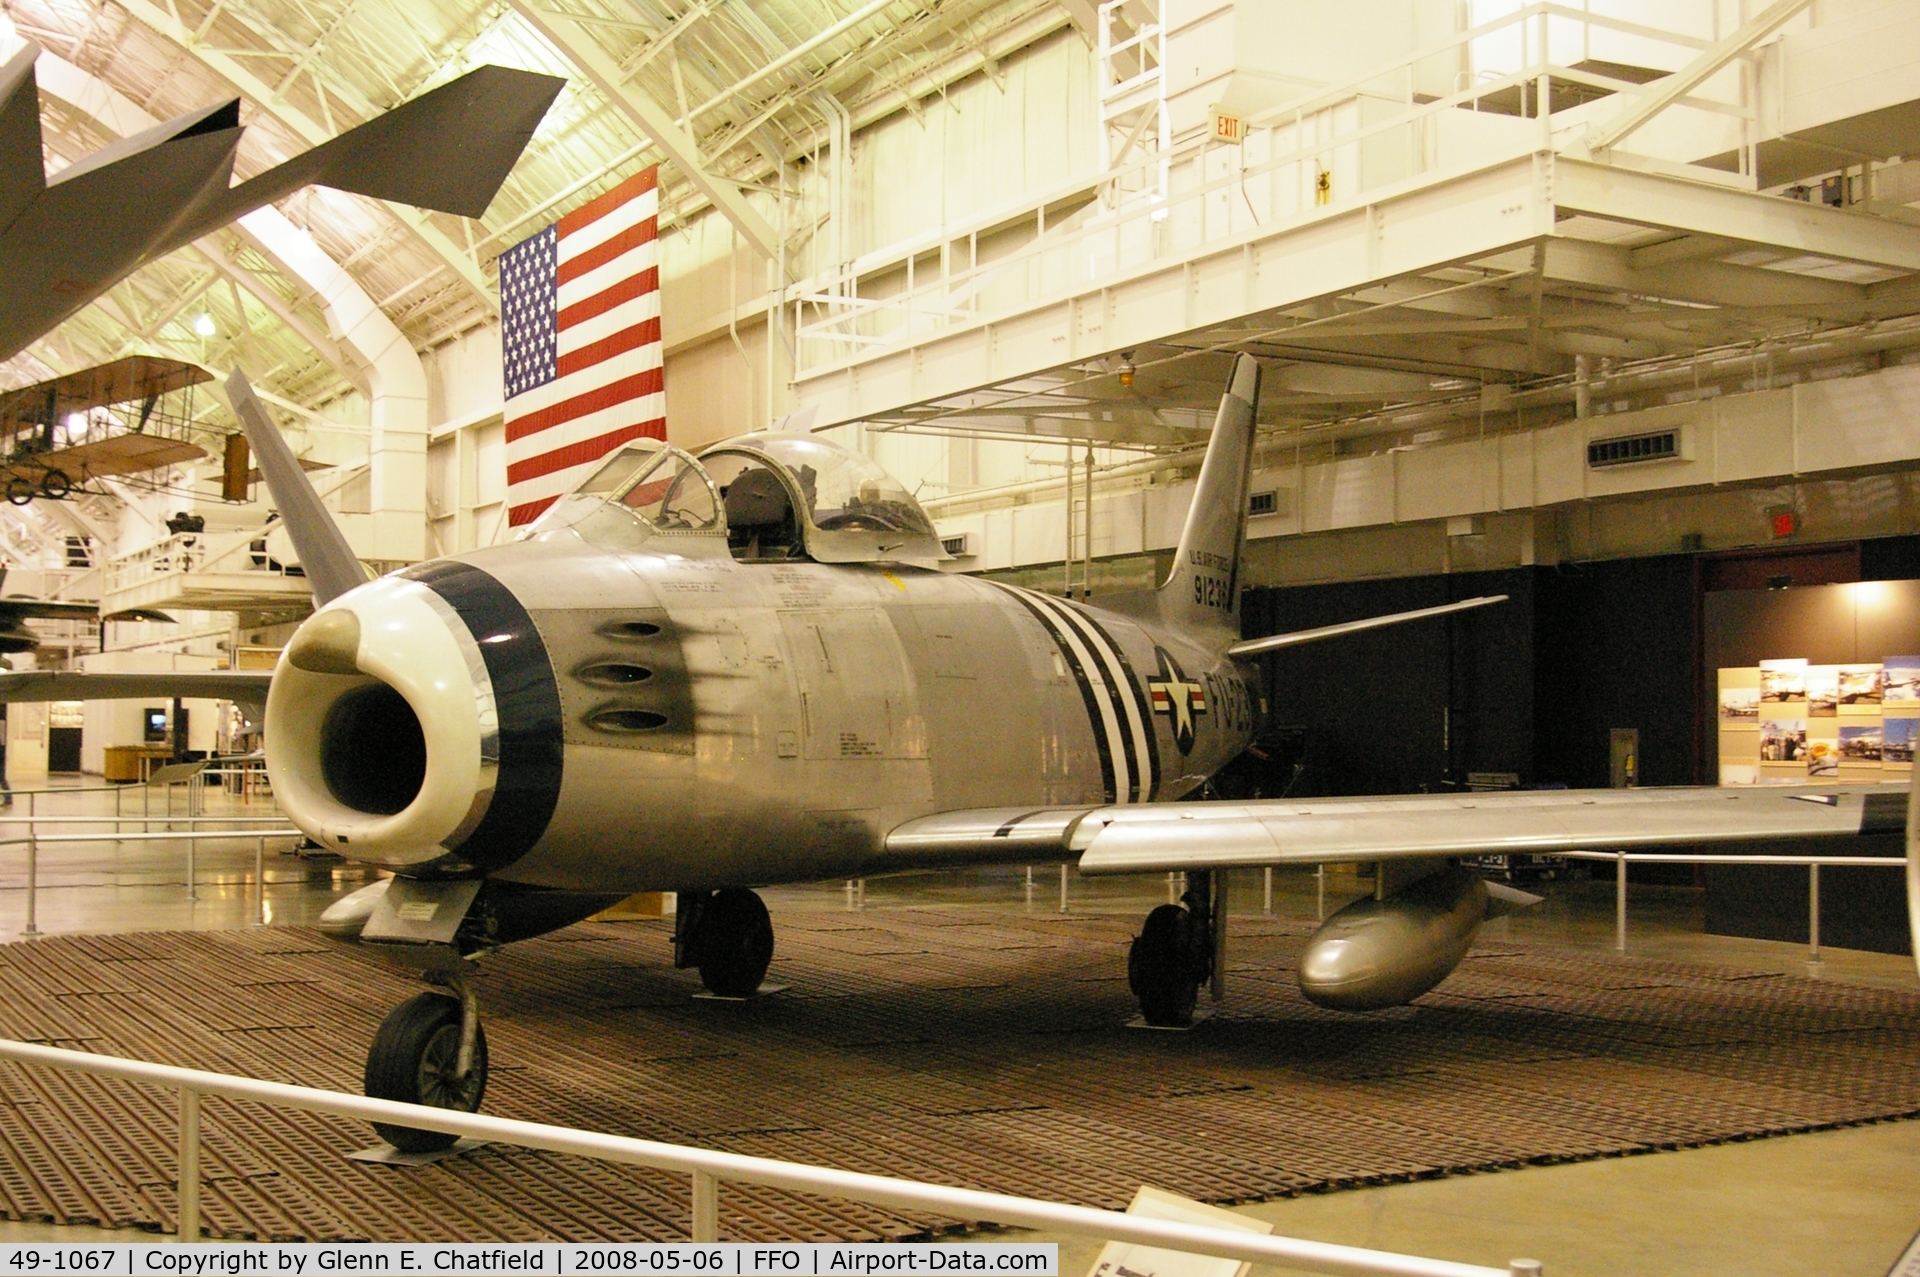 49-1067, 1949 North American F-86A-5-NA Sabre C/N 161-61, Displayed at the National Museum of the U.S. Air Force